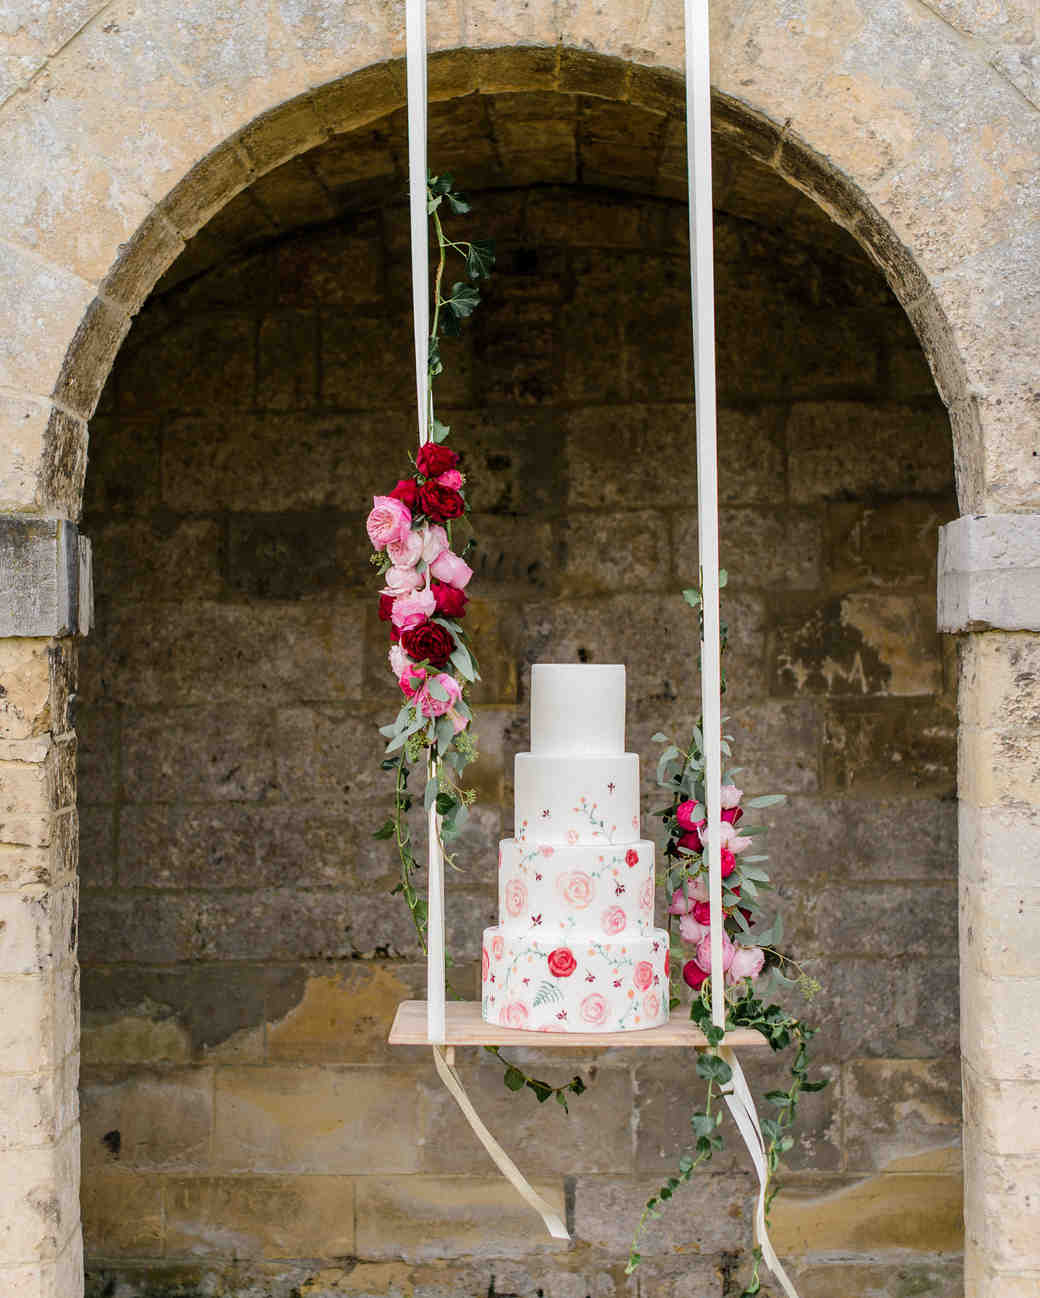 Romantic wedding cake on a hanging swing embellished with blush, deep red roses and greeneries. // Jaw-dropping suspended cake display ideas for your wedding day. // mysweetengagement.com